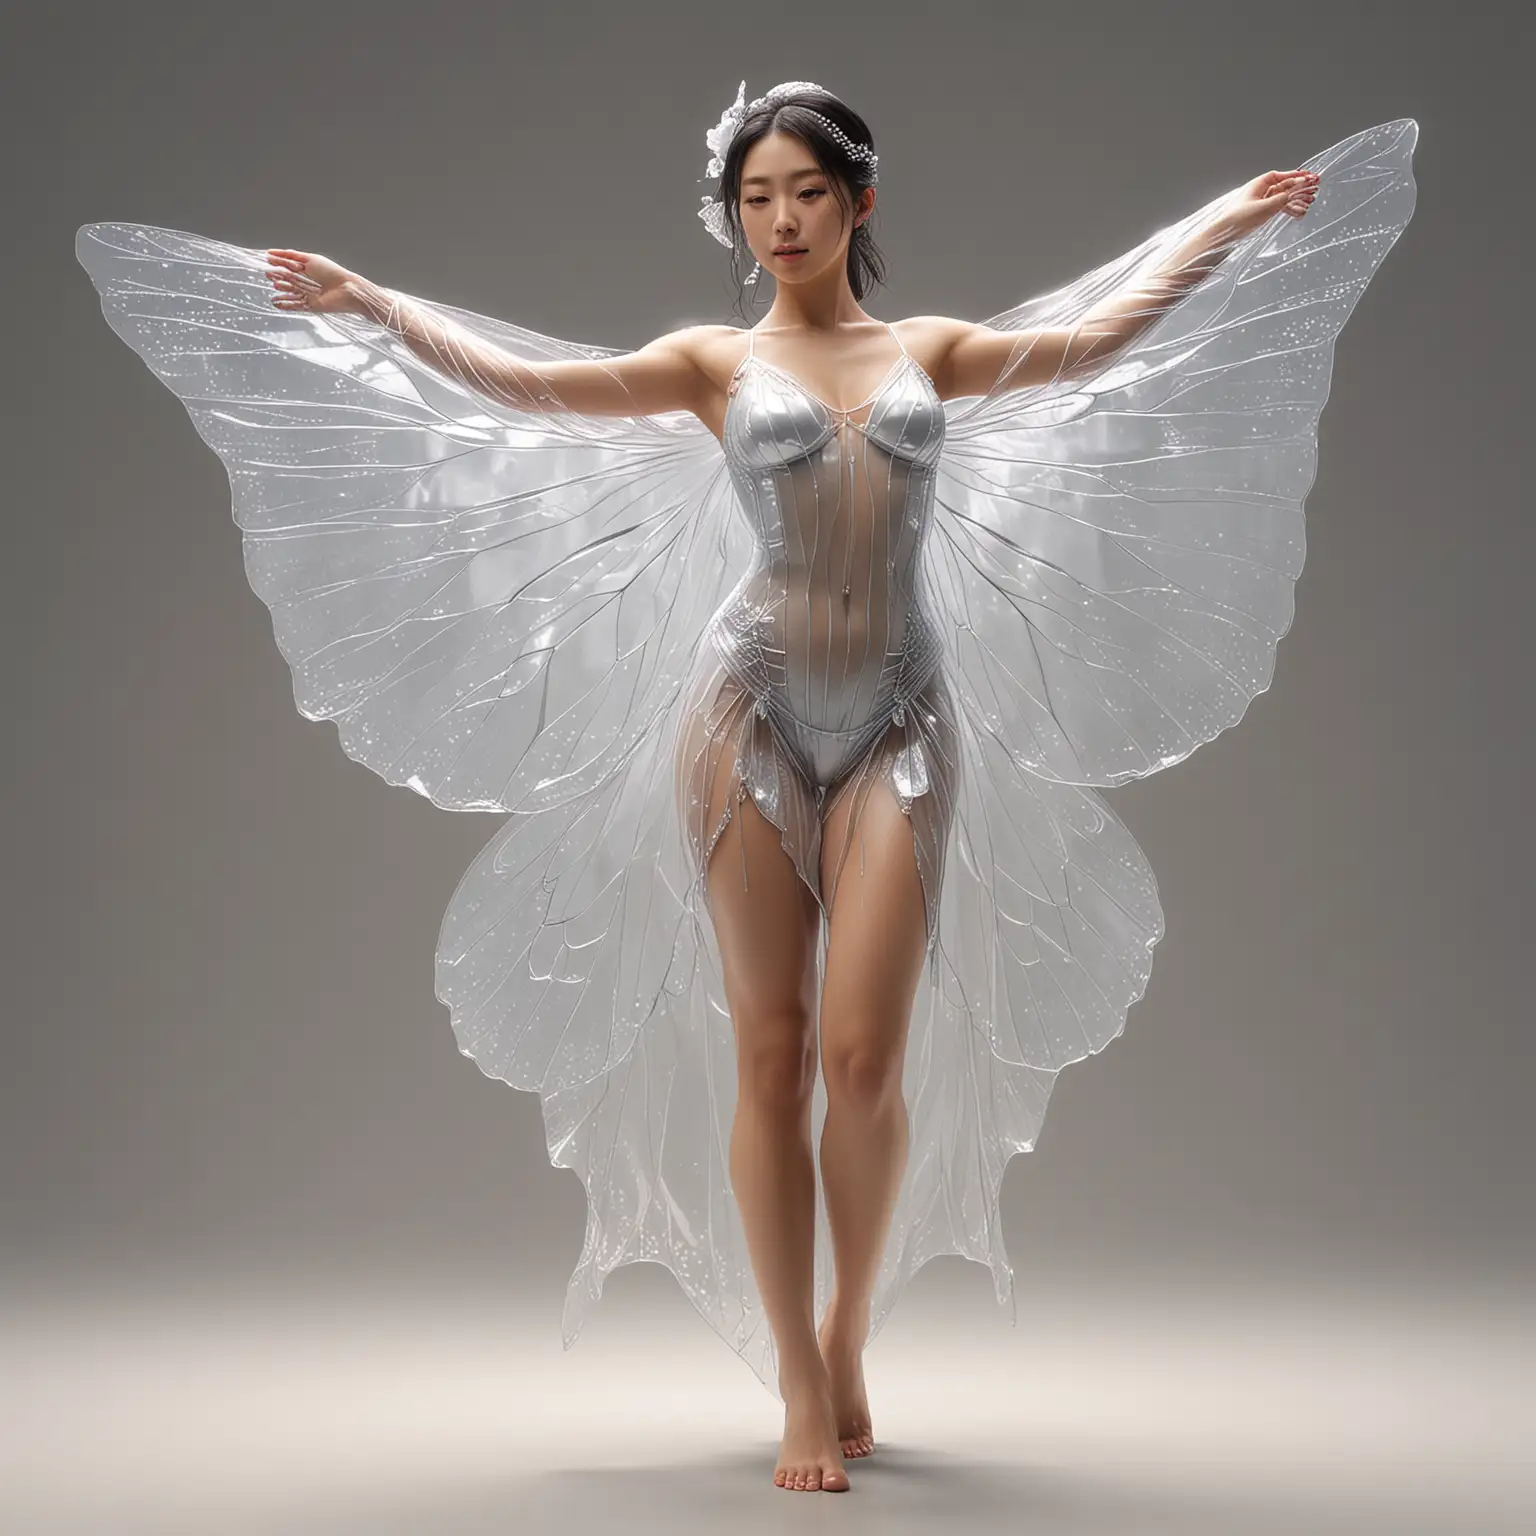 Realistic-Sculpture-of-a-Japanese-Woman-in-Sheer-Butterflylike-Clothing